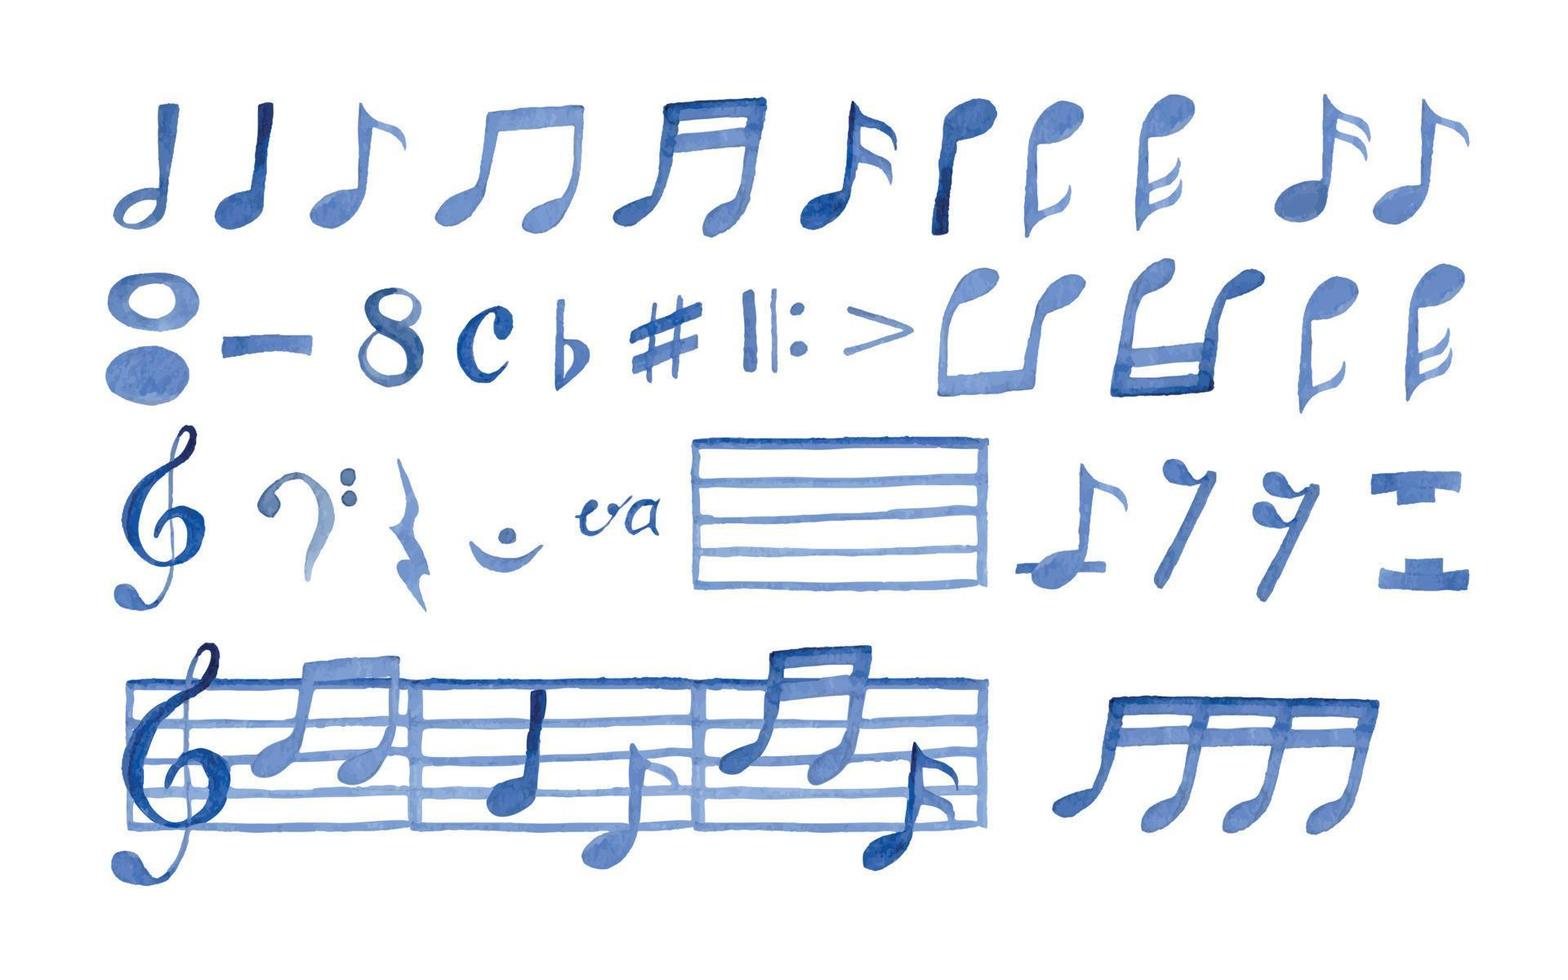 Watercolor Music Notes for Piano Hand painted doodle vector illustrated Big set Blue Color on white background